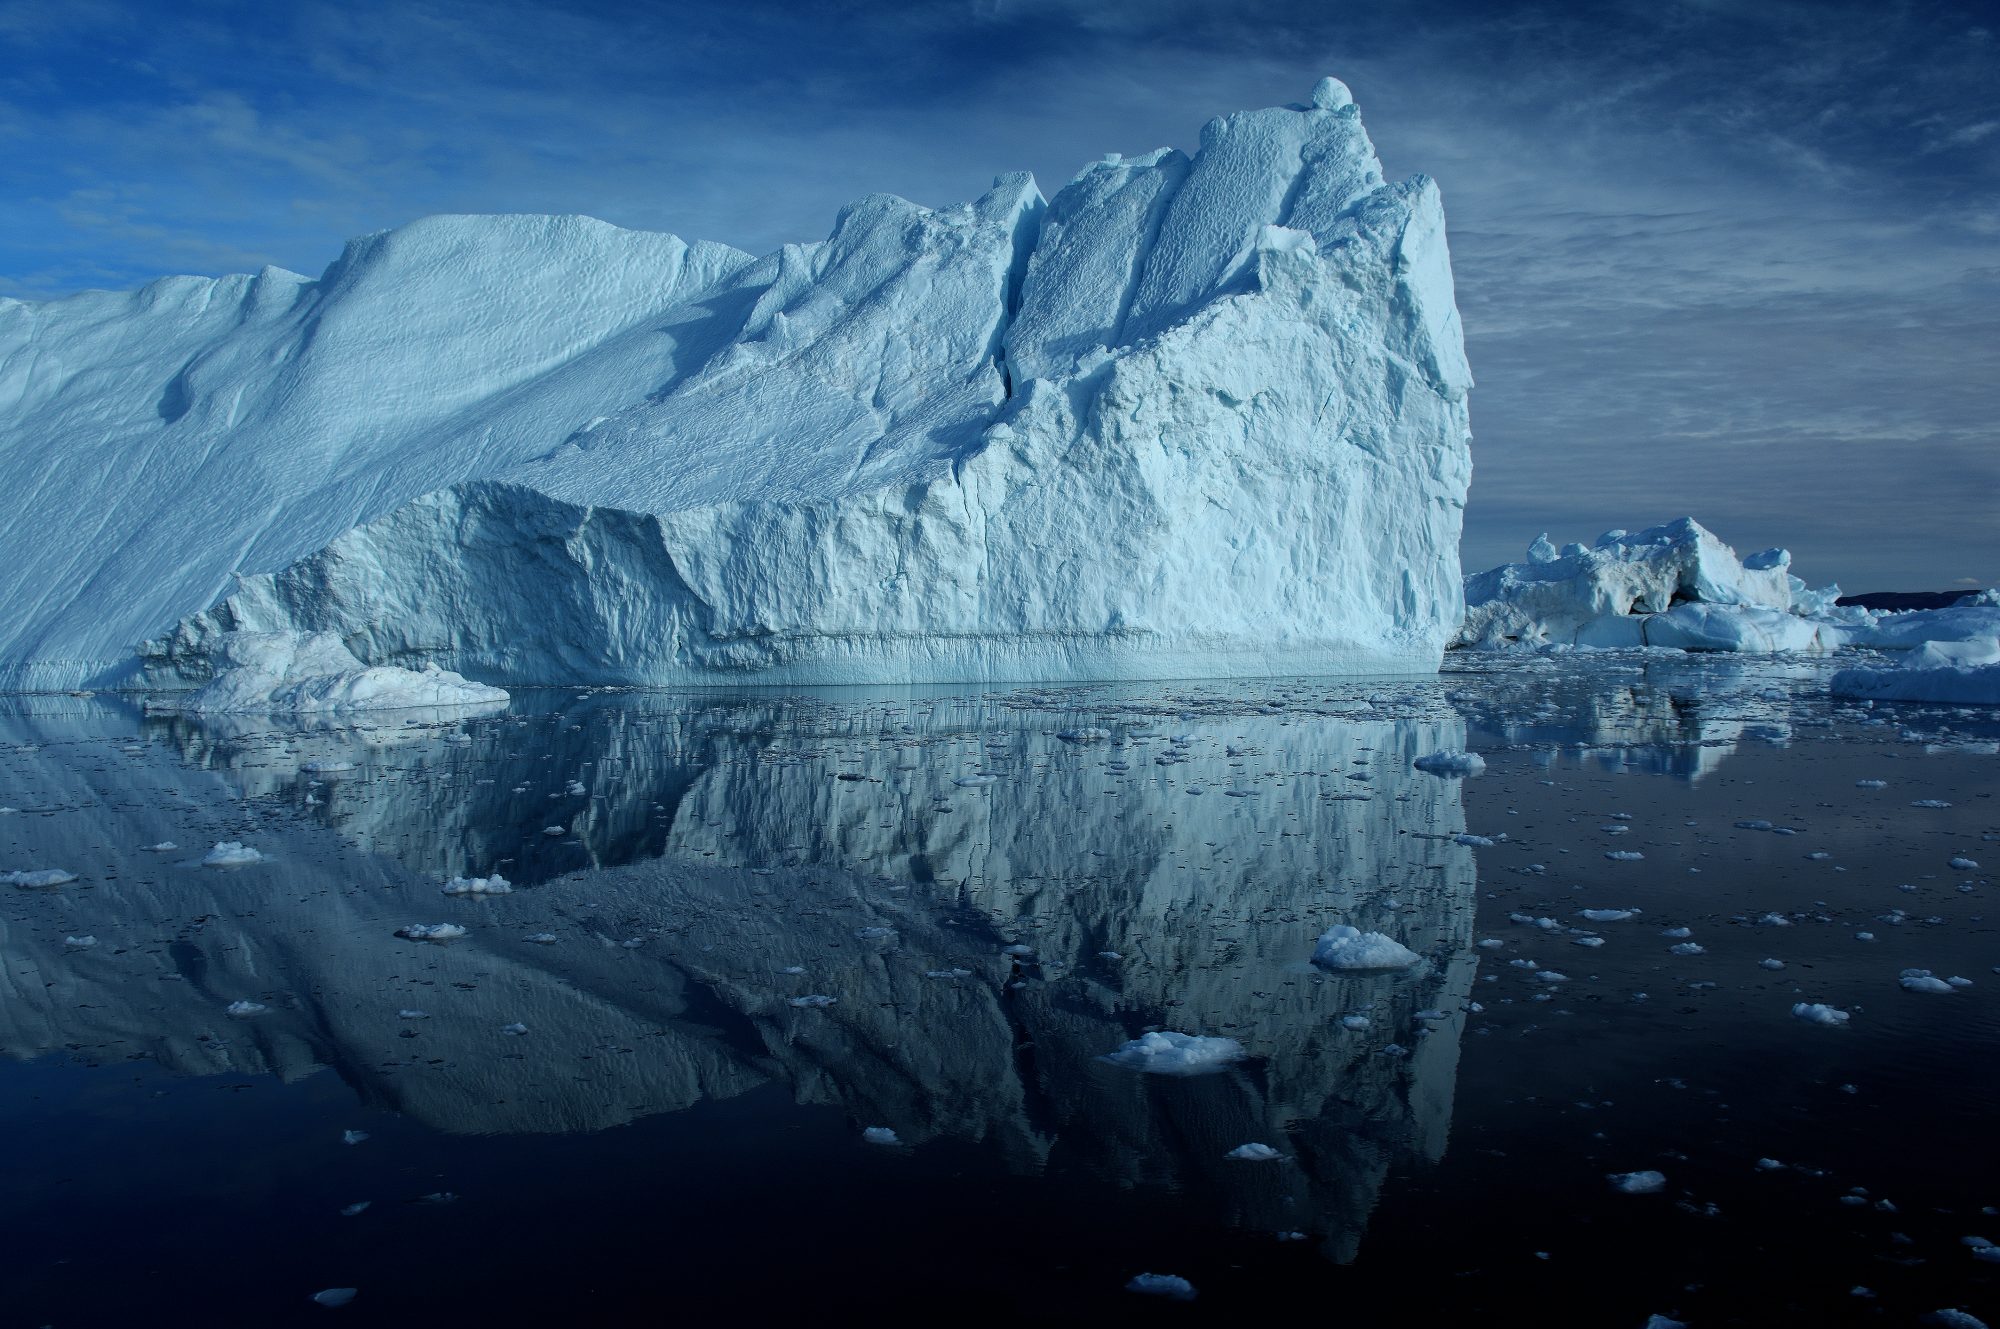 Drifting icebergs in the bay of Ilulissat, Greenland